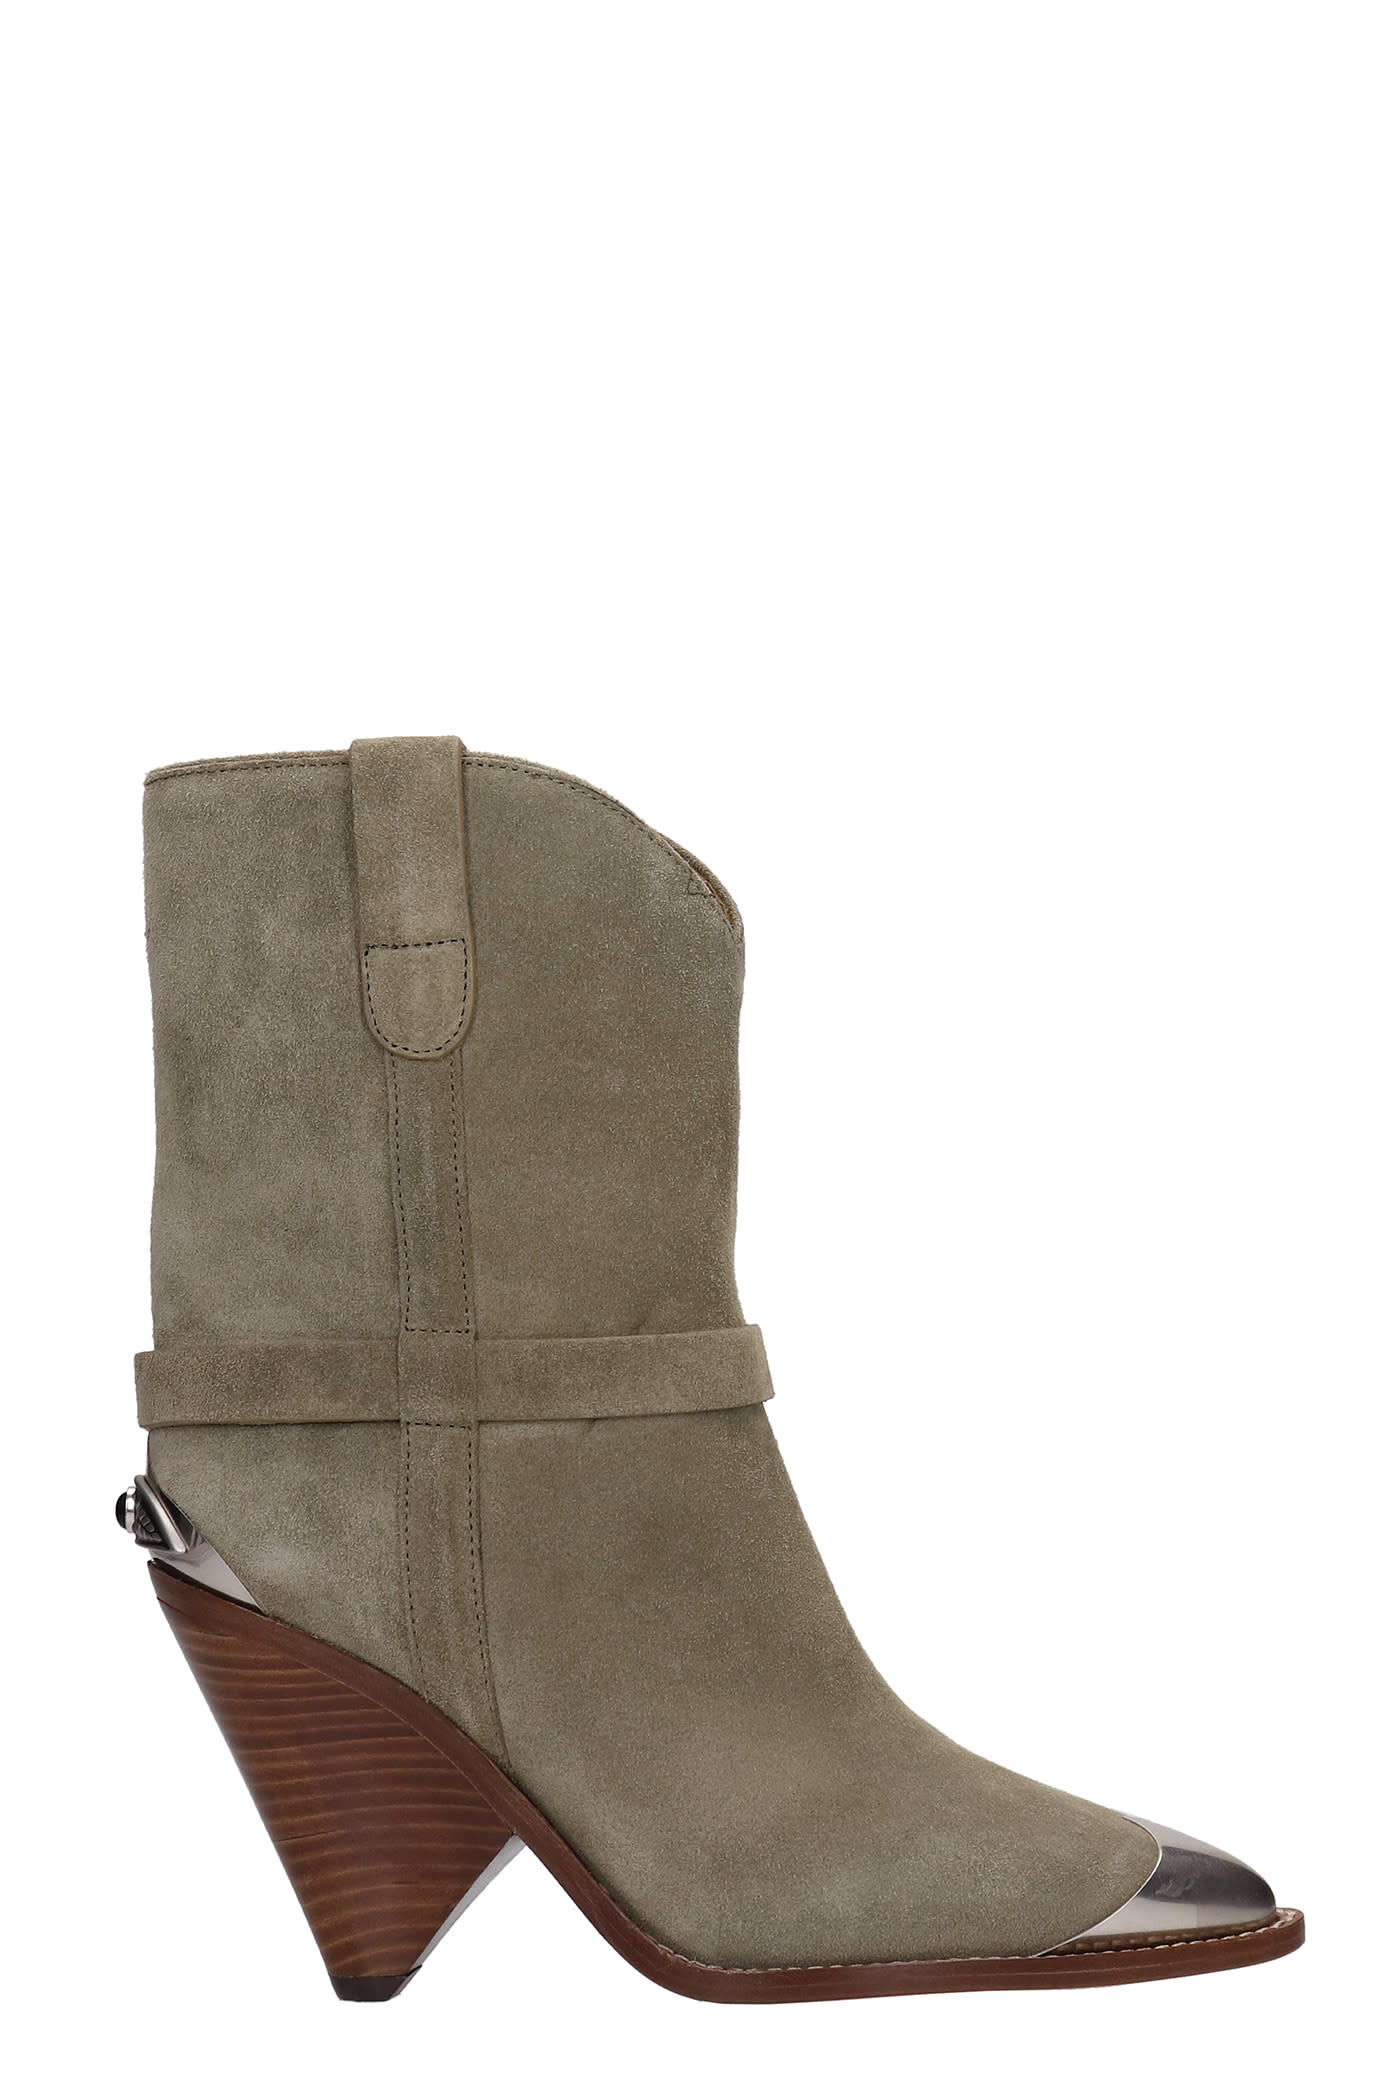 Buy Isabel Marant Lamsy Texan Ankle Boots In Taupe Suede online, shop Isabel Marant shoes with free shipping